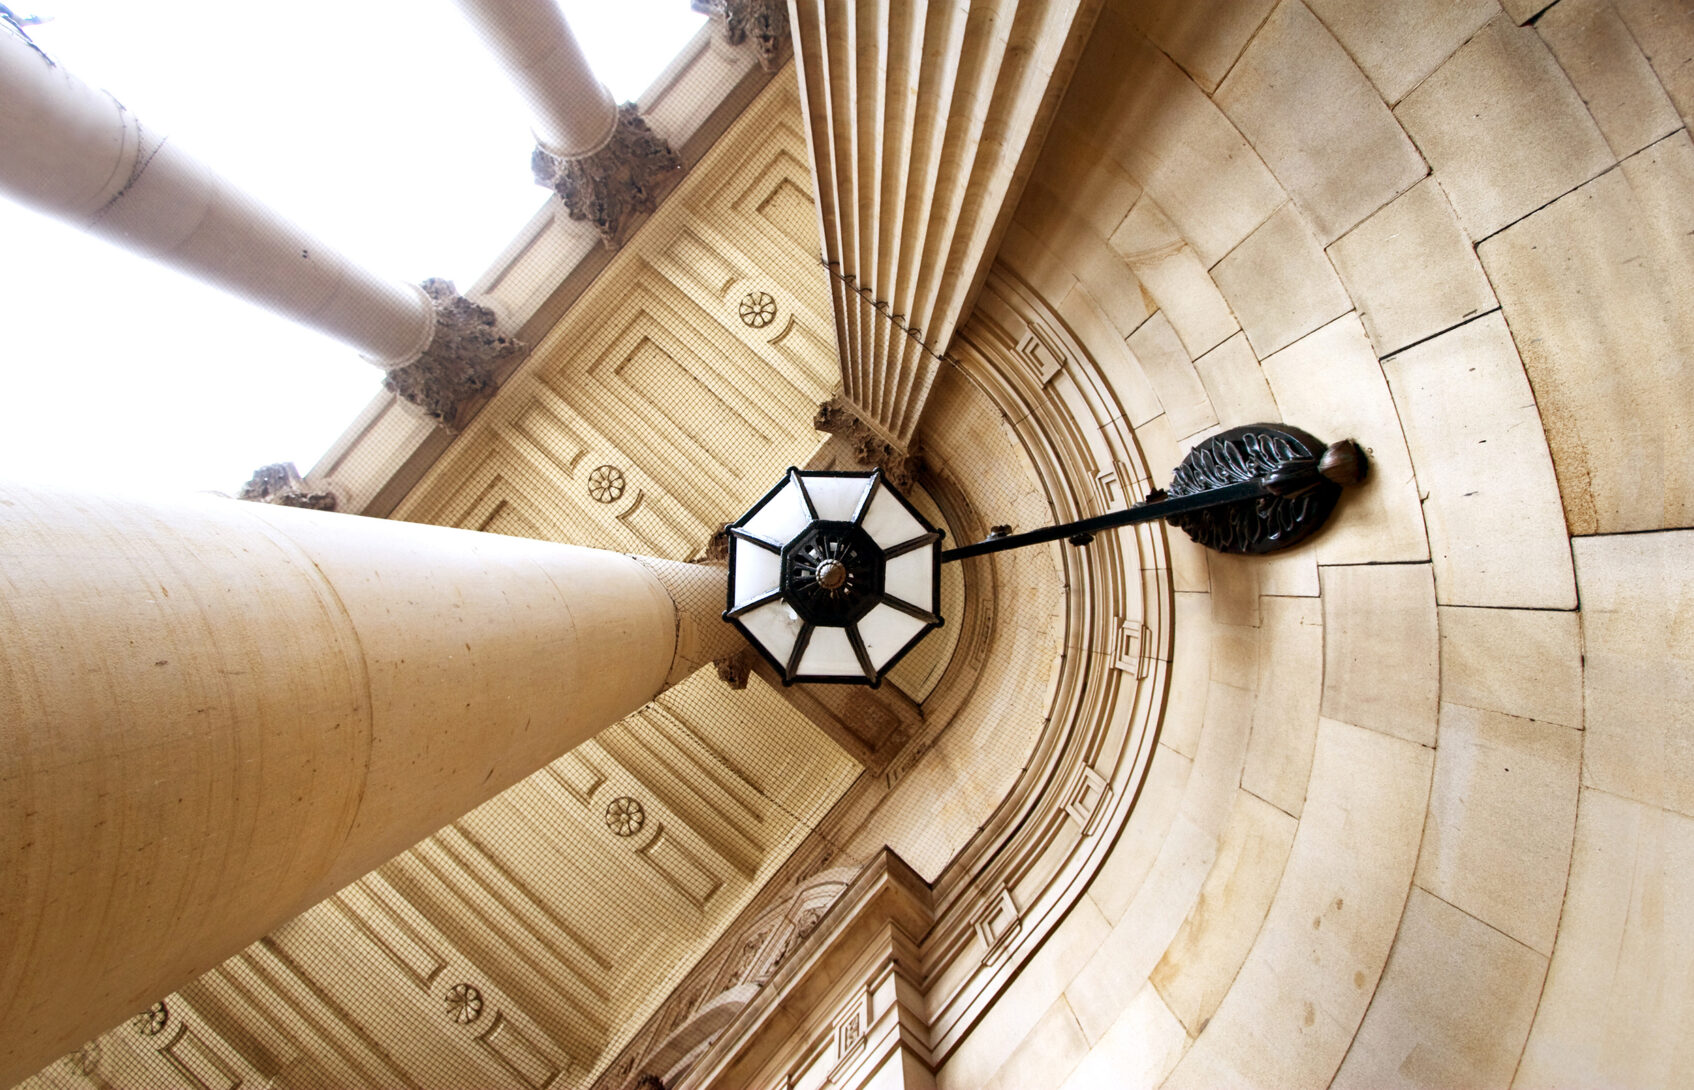 Image of the entrance to the Capitol Building looking up at architectural detail